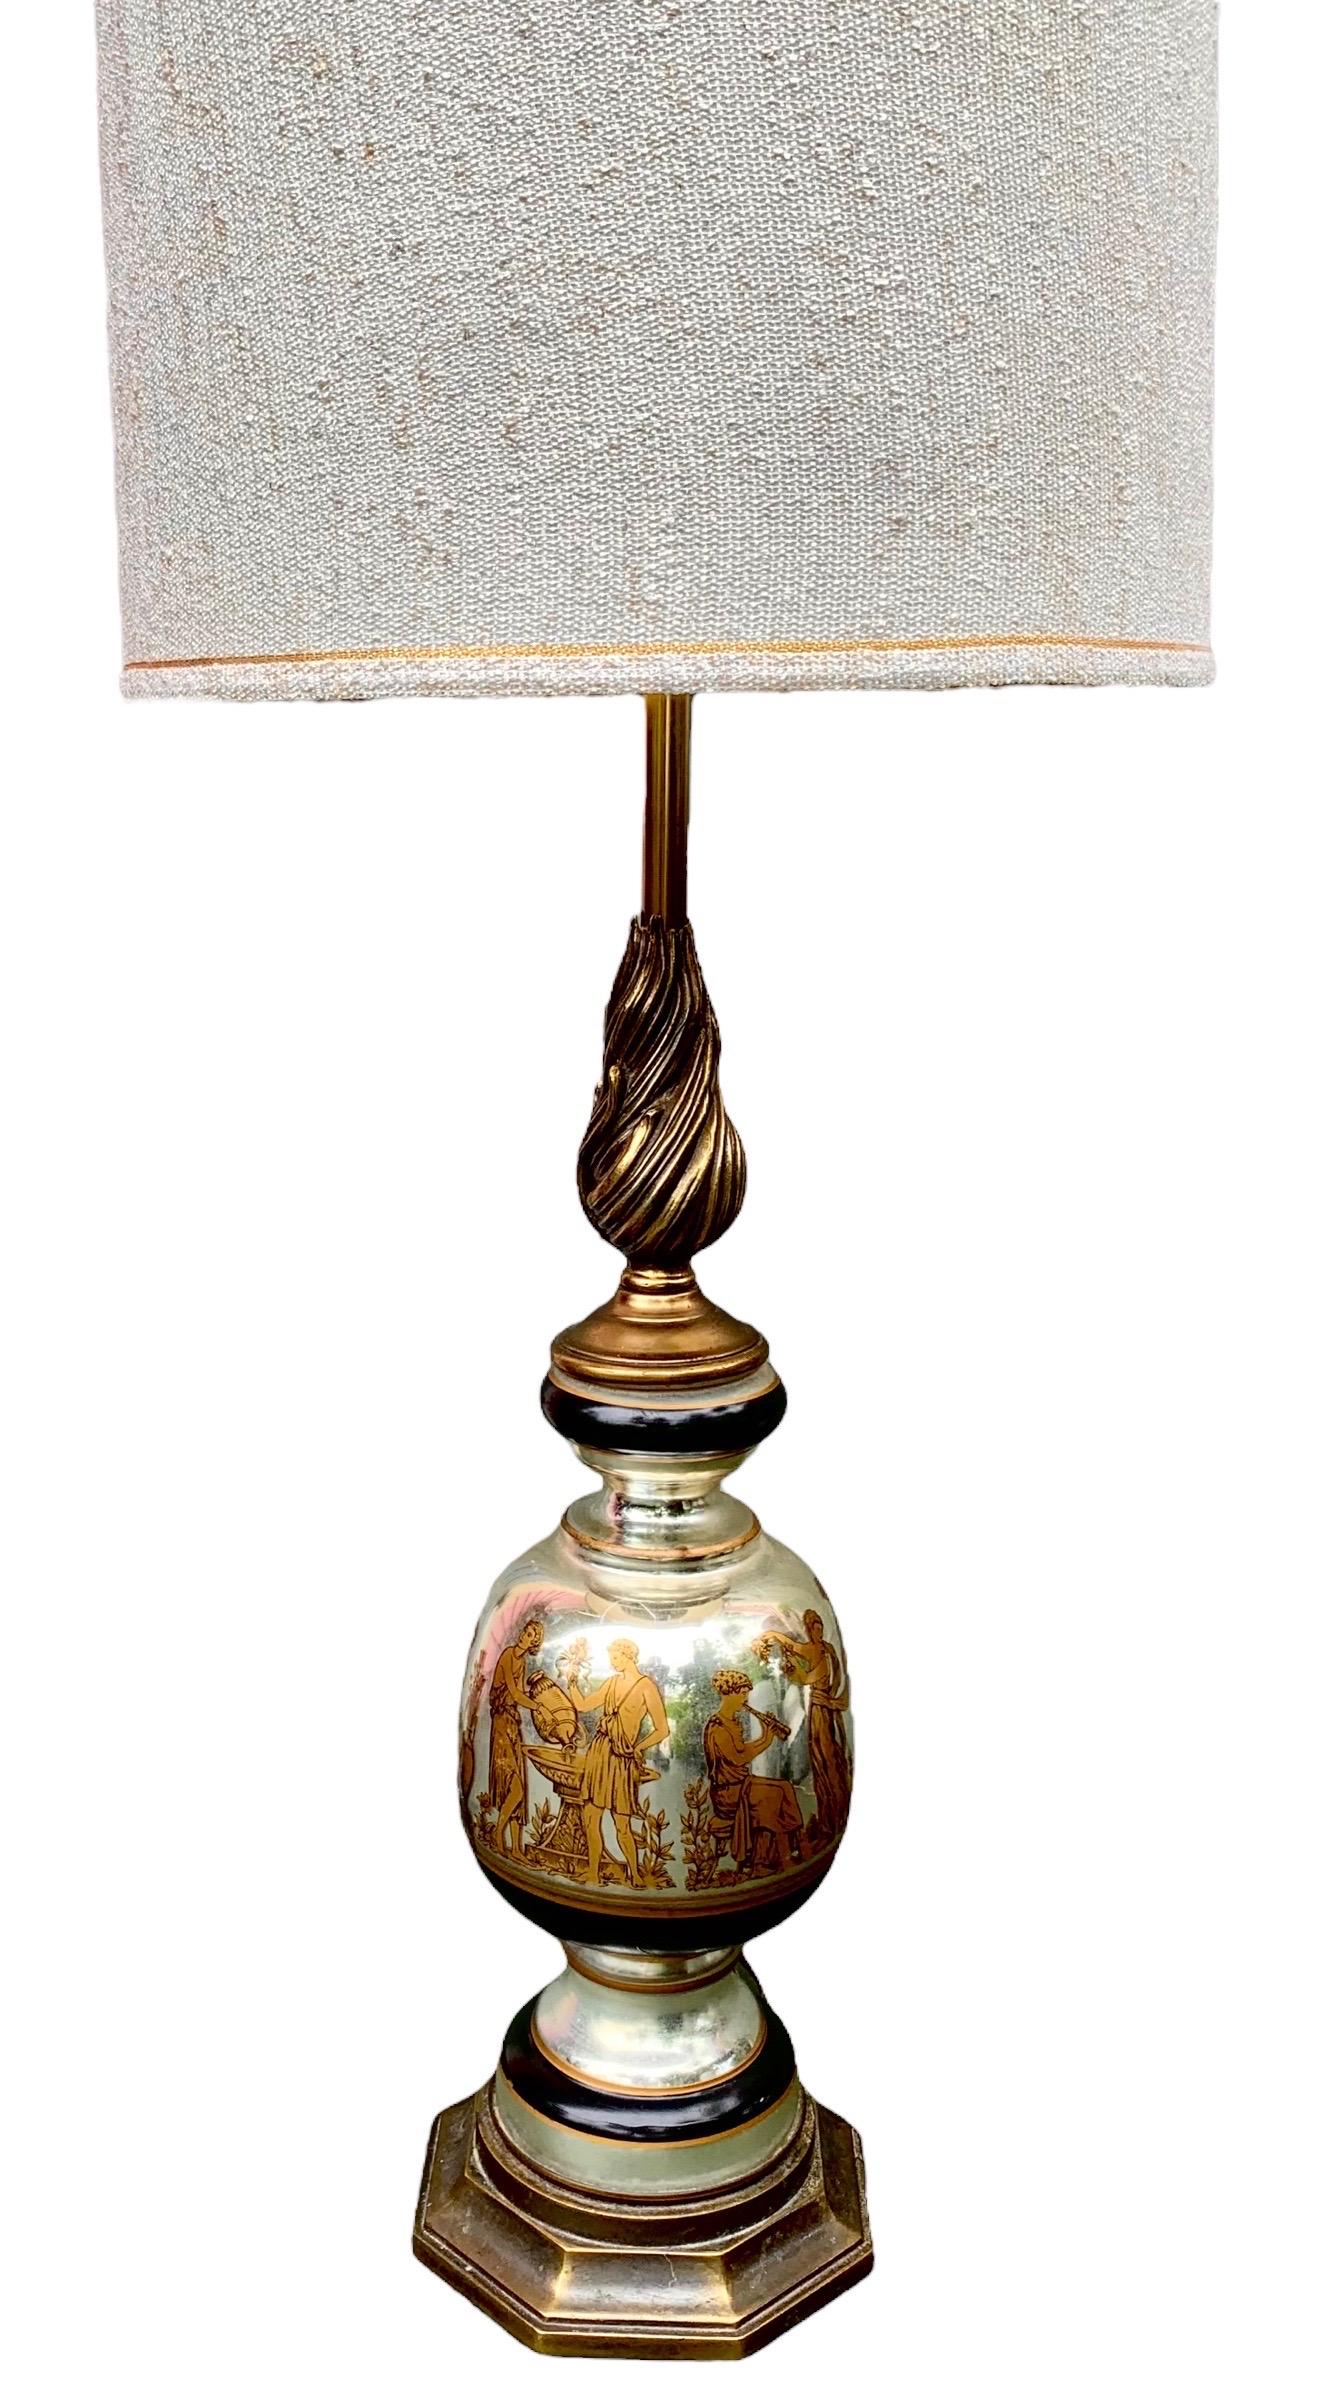 A fine example of Mid-Century Modern style in the form of a mercury glass table lamp with classical Grecian figures and a period shade with gold and black trim. 

The height of Mid-Century Modern elegance with the depiction of gold and black